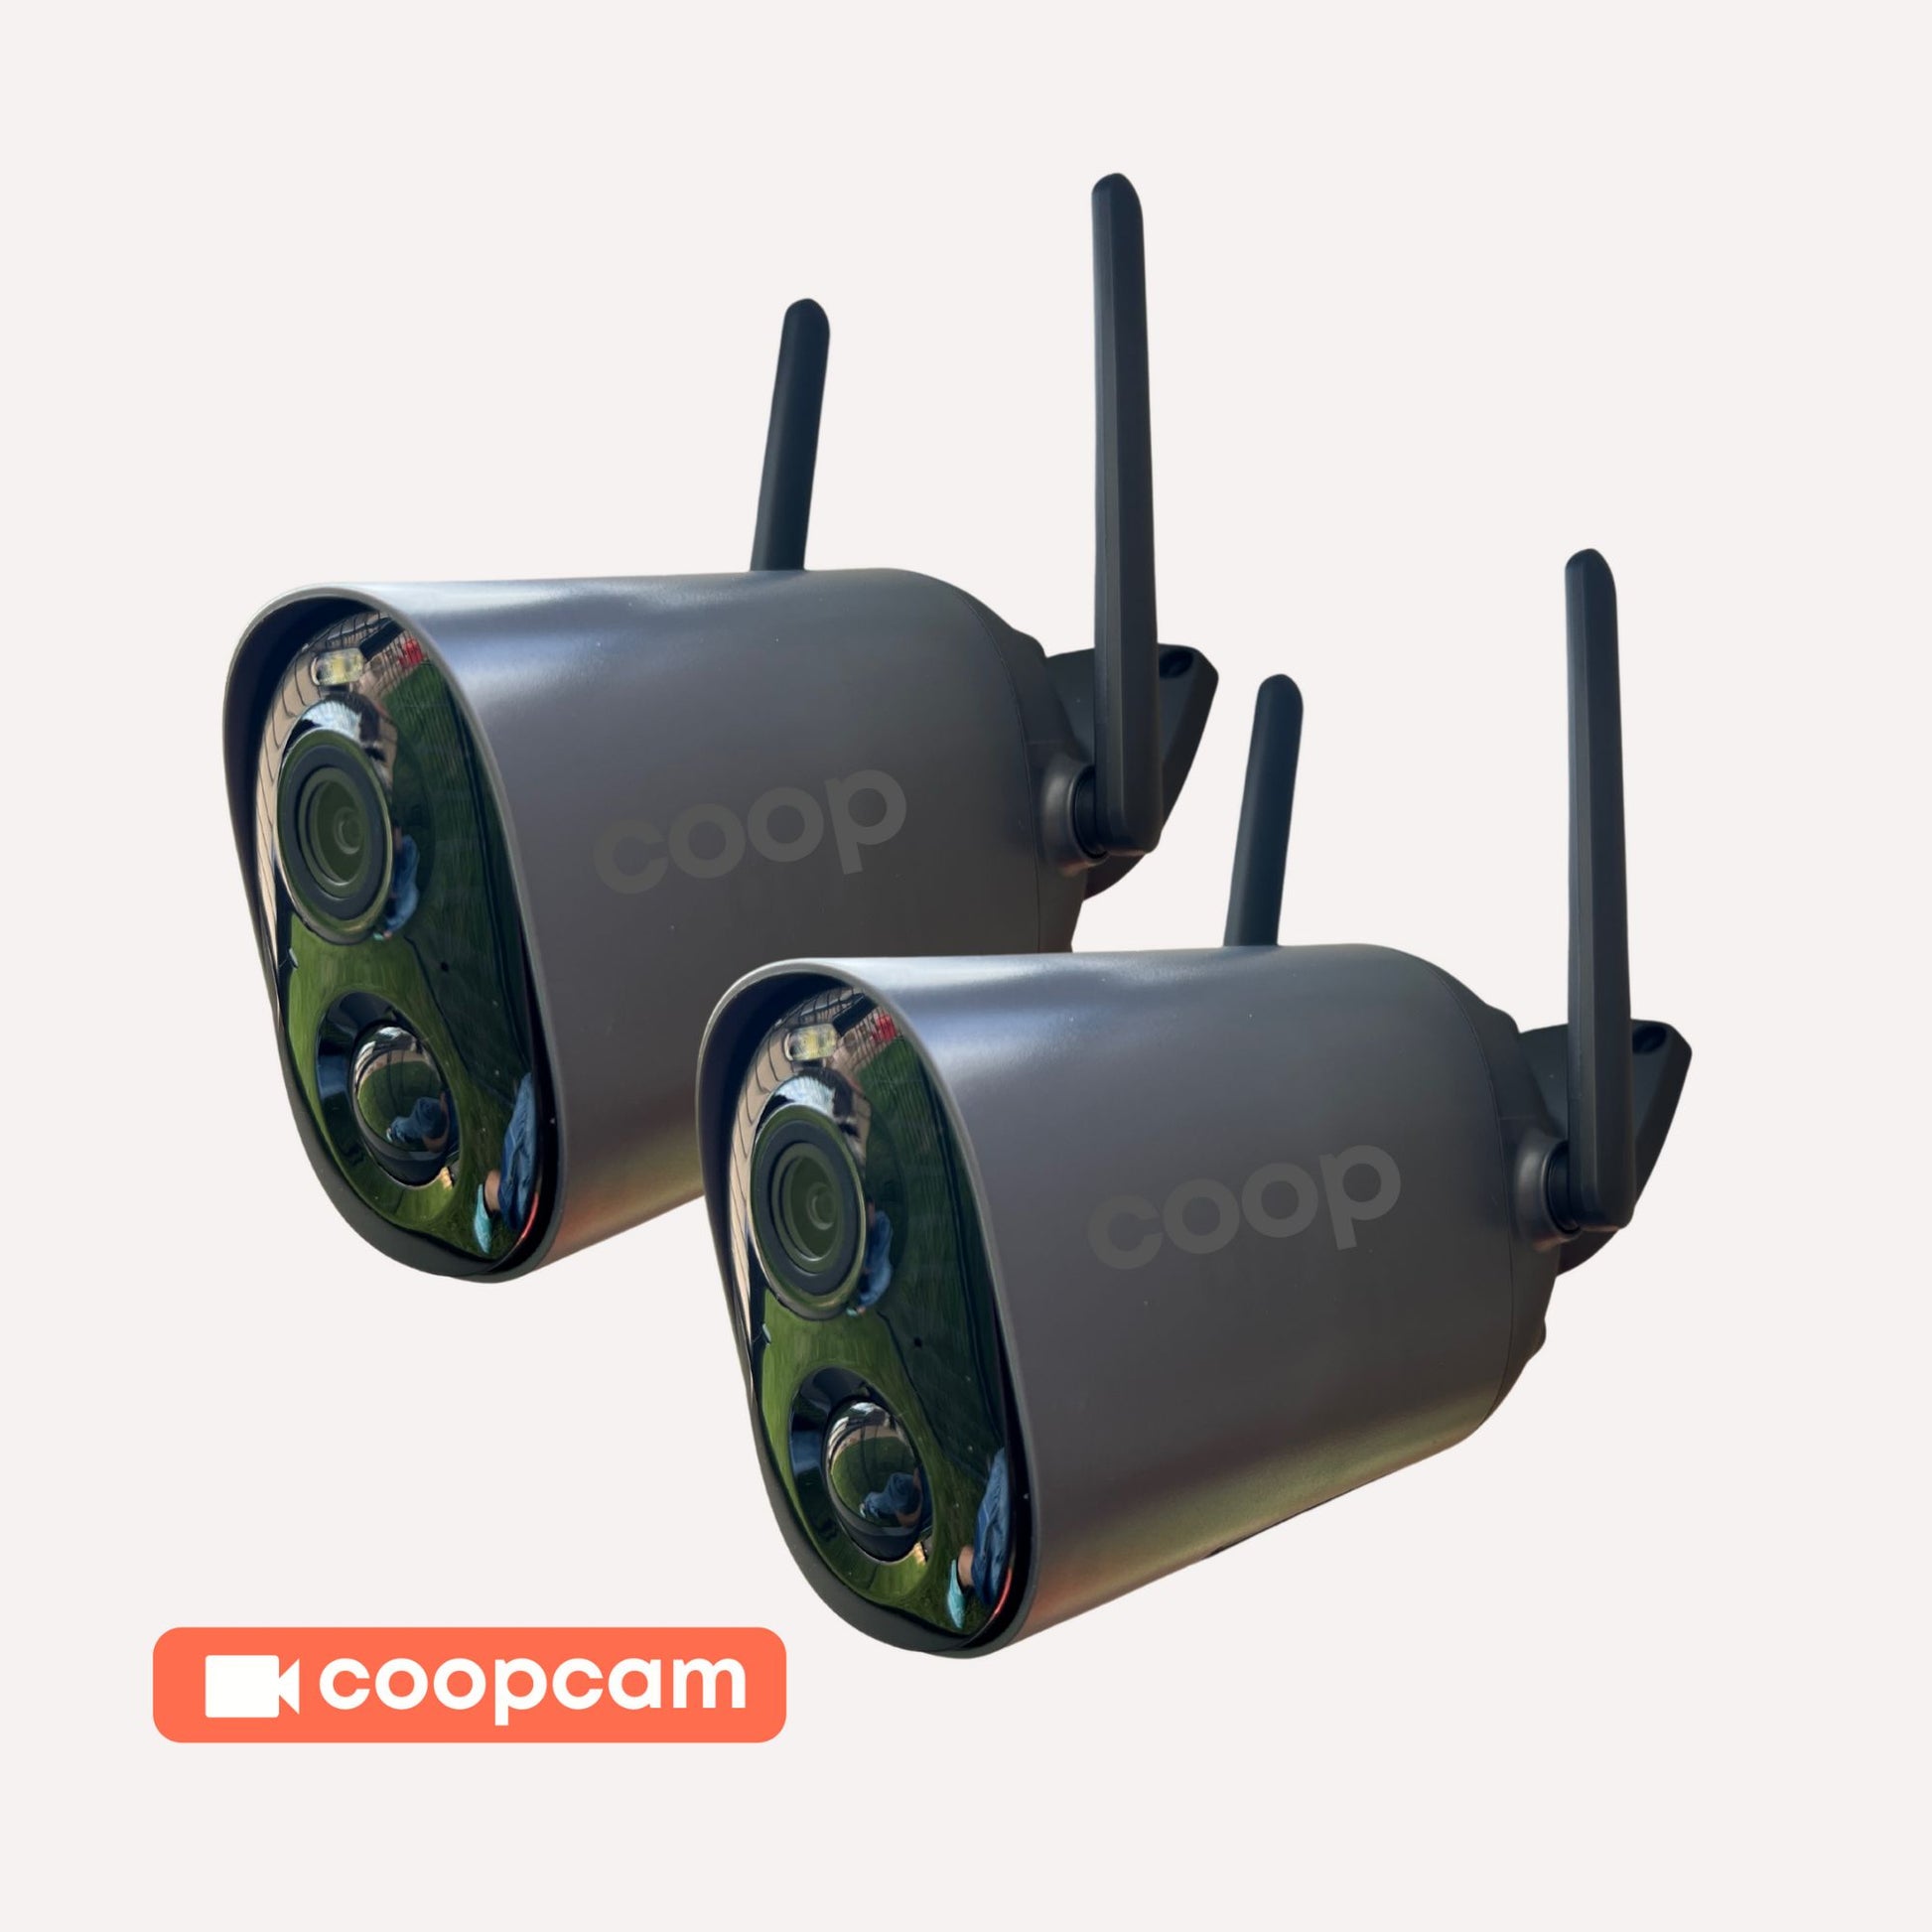 The Smart Coop cameras have 2-way audio which allows you to hear whats going on in the coop.